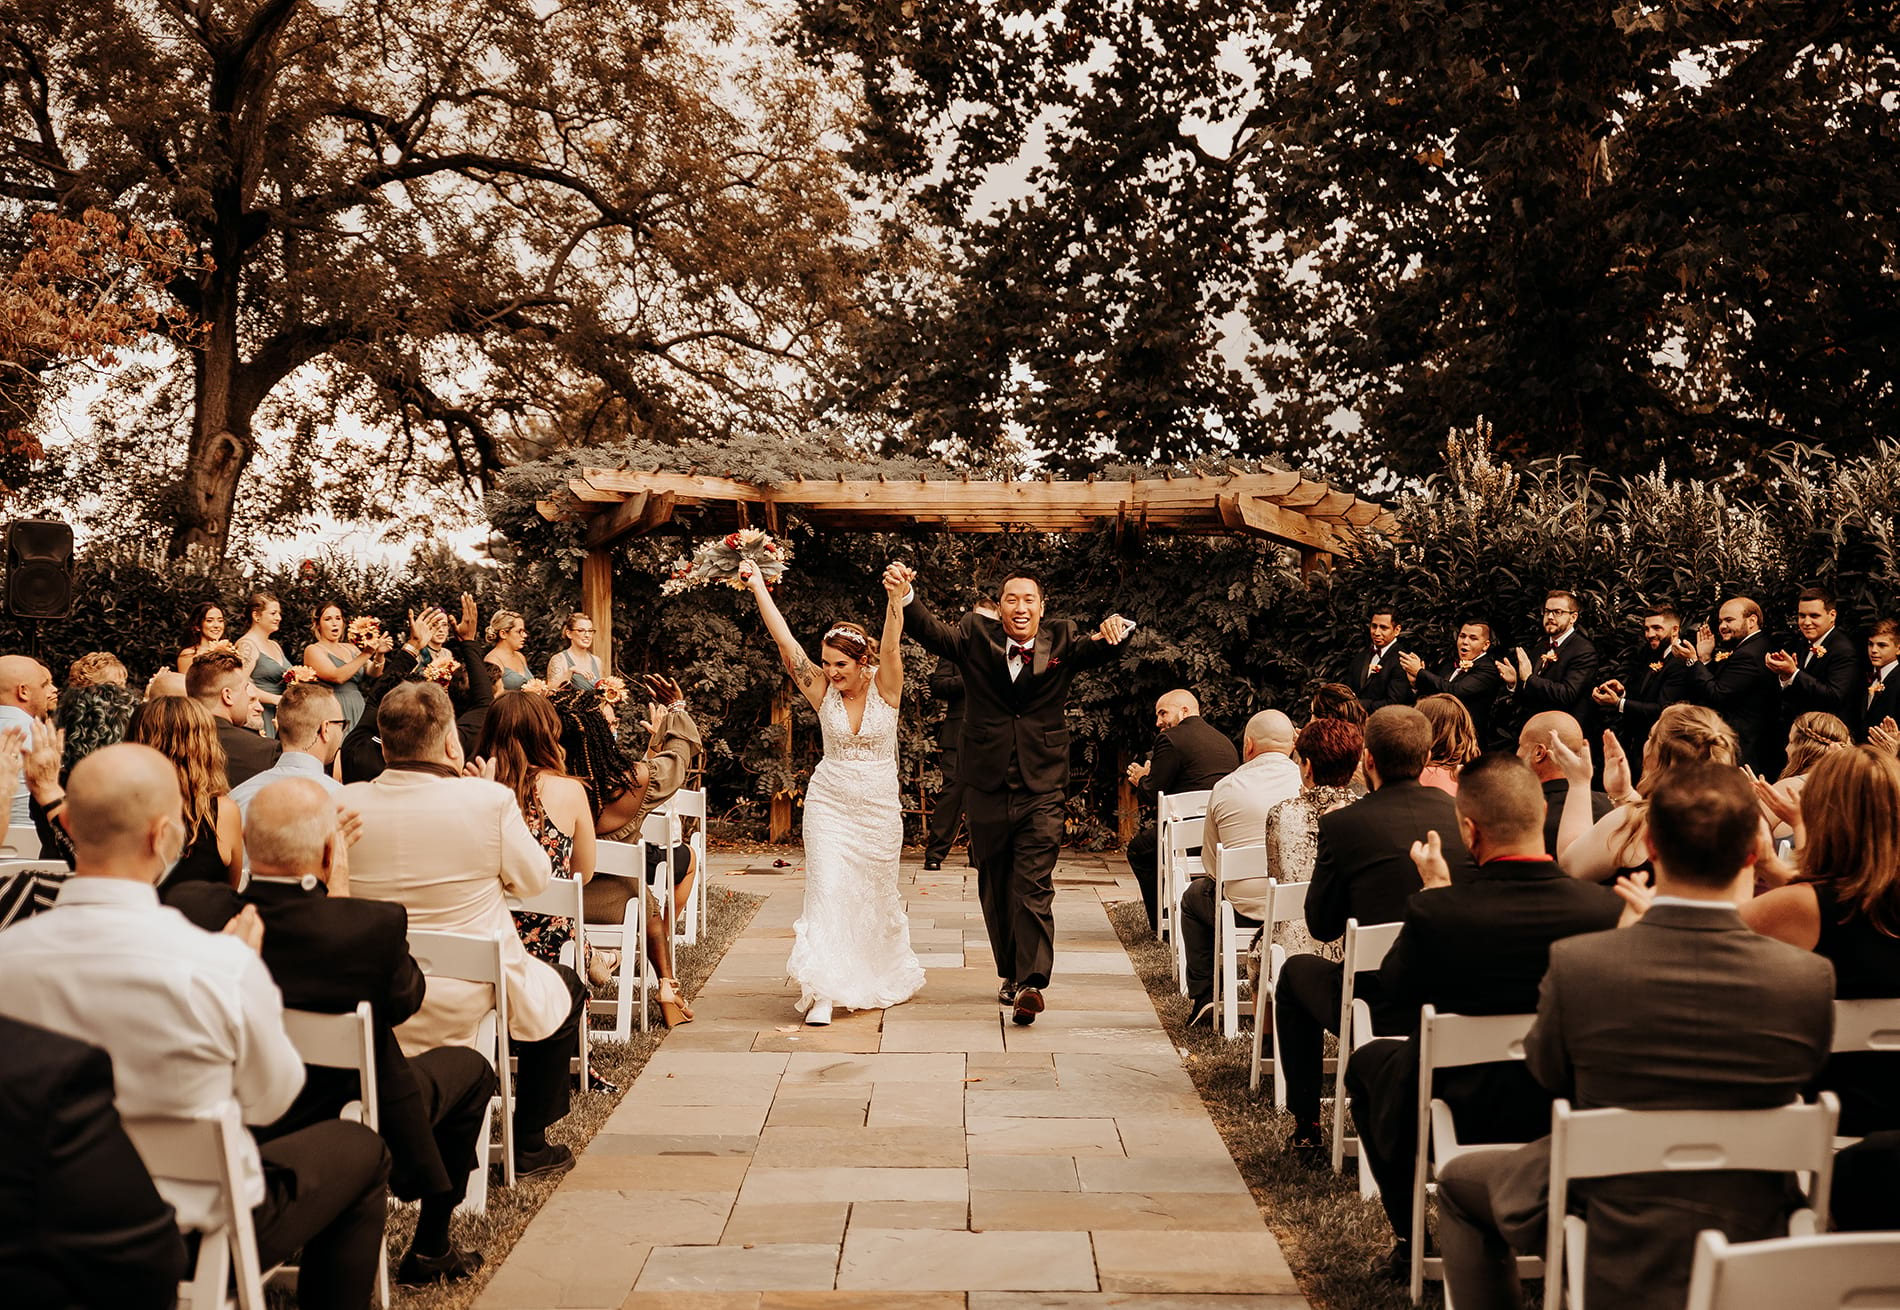 Just married couple walking down aisle after an outdoor ceremony.